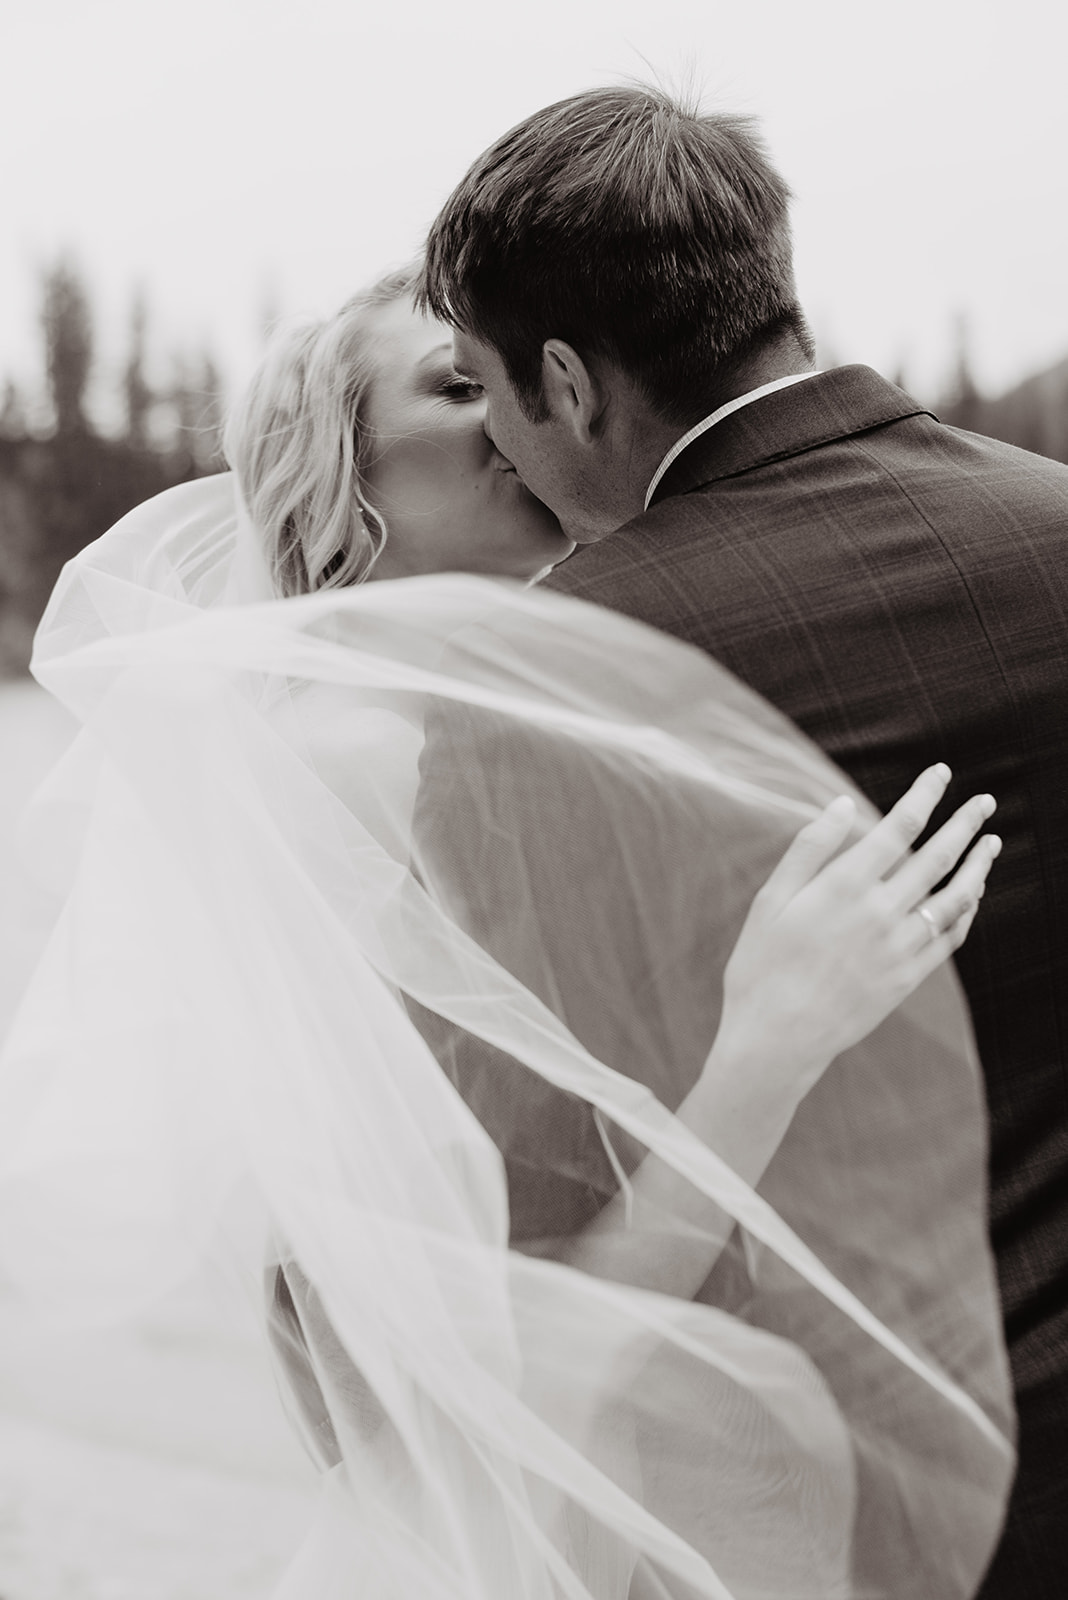 Bentwood Inn weddings with romantic wedding picture in black and white with bride and groom kissing as the bride wraps her arm around her groom while her wedding veil blows in the wind past them